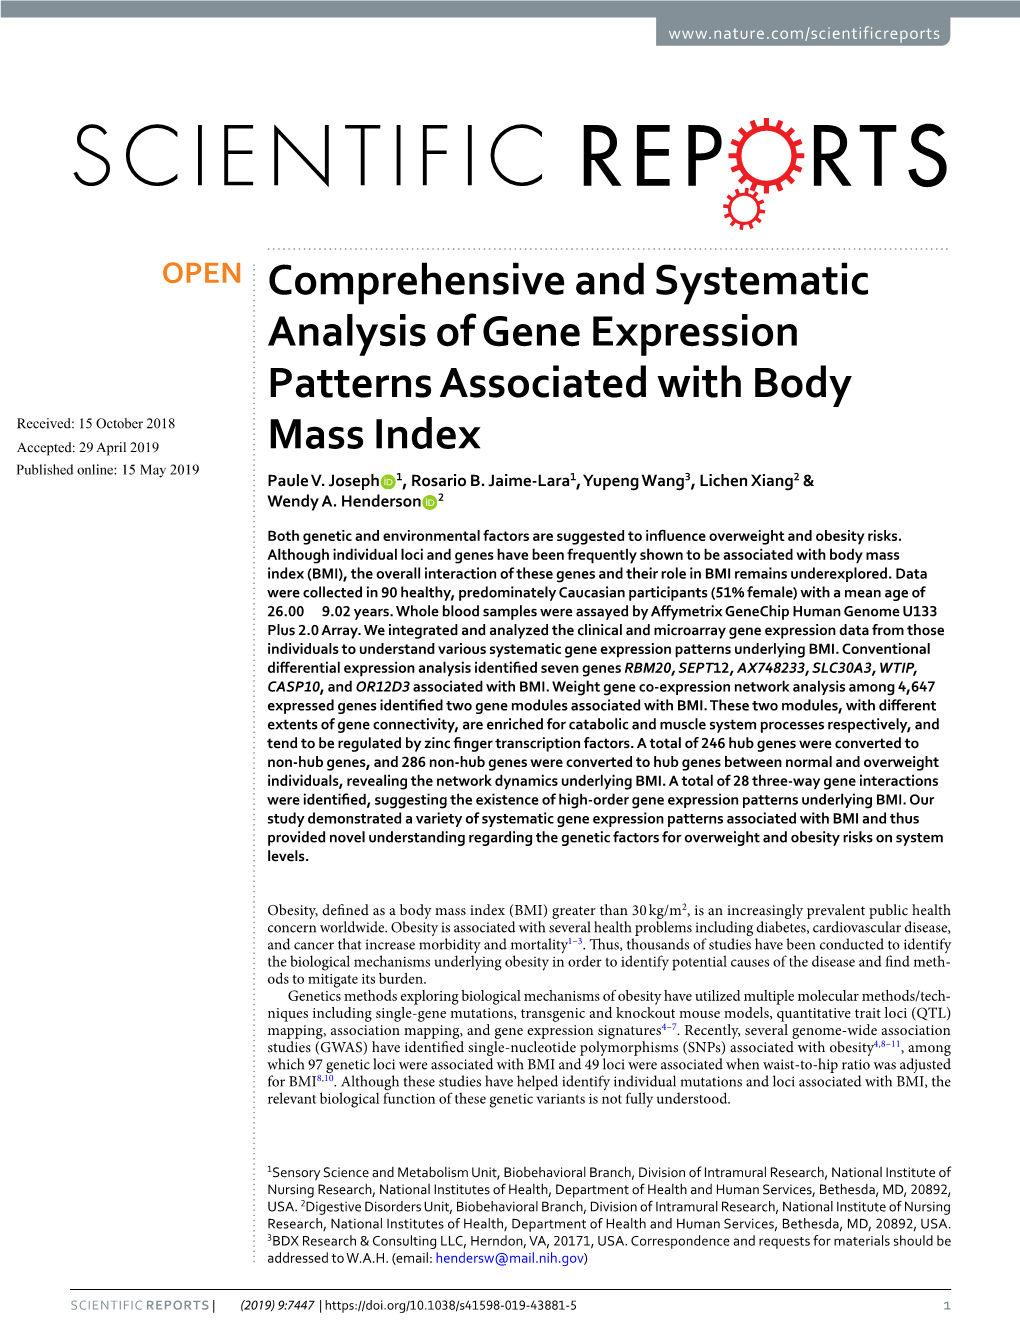 Comprehensive and Systematic Analysis of Gene Expression